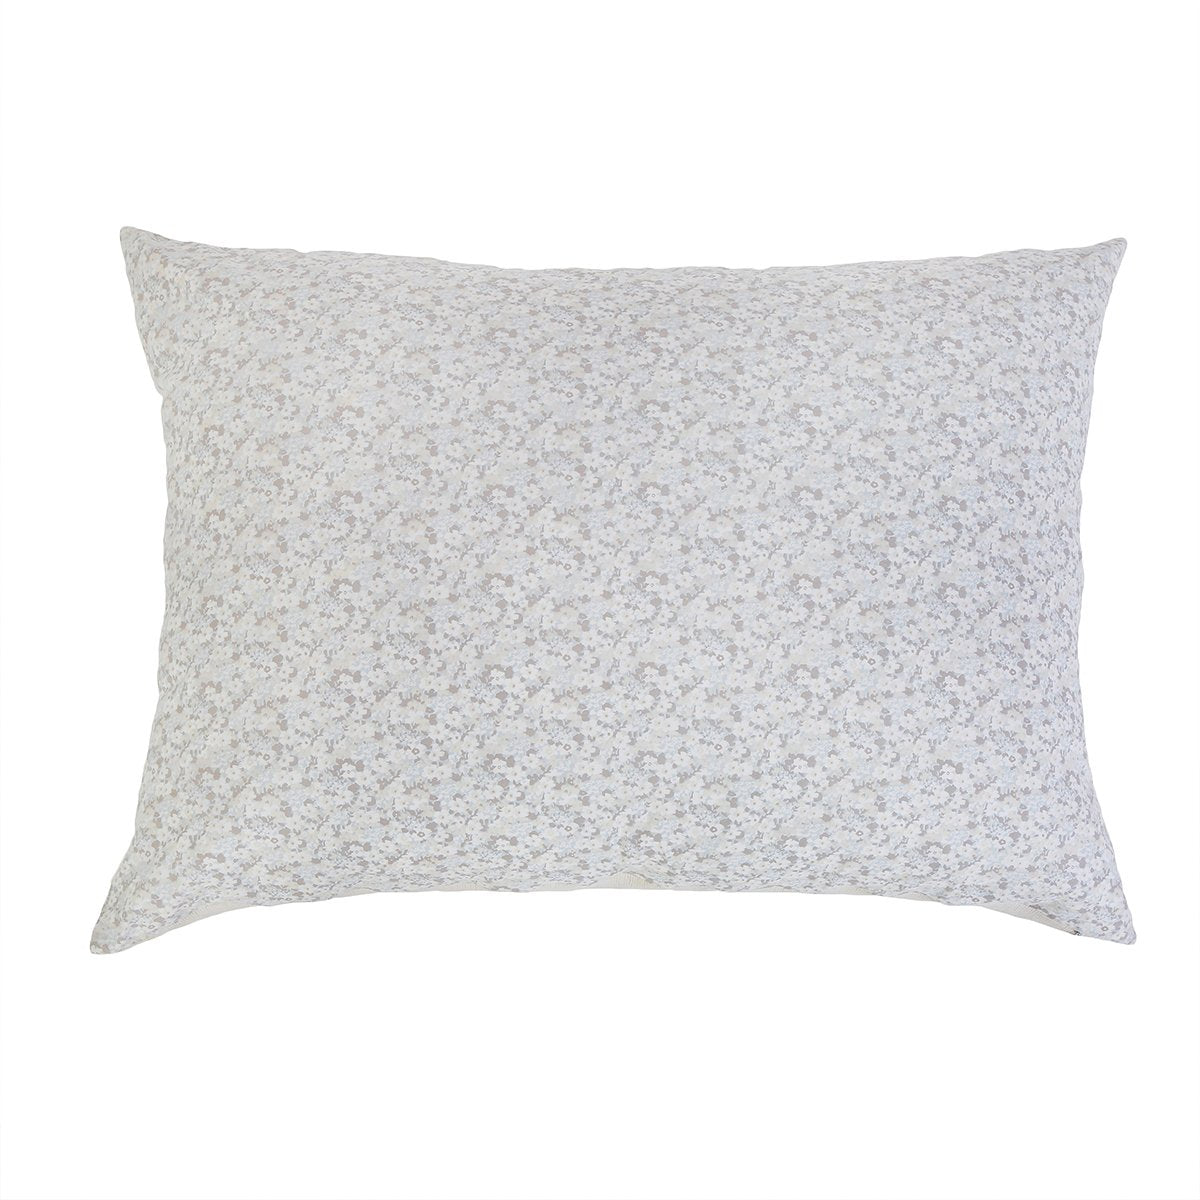 JUNE BIG PILLOW 28" X 36" WITH INSERT-Pom Pom at Home